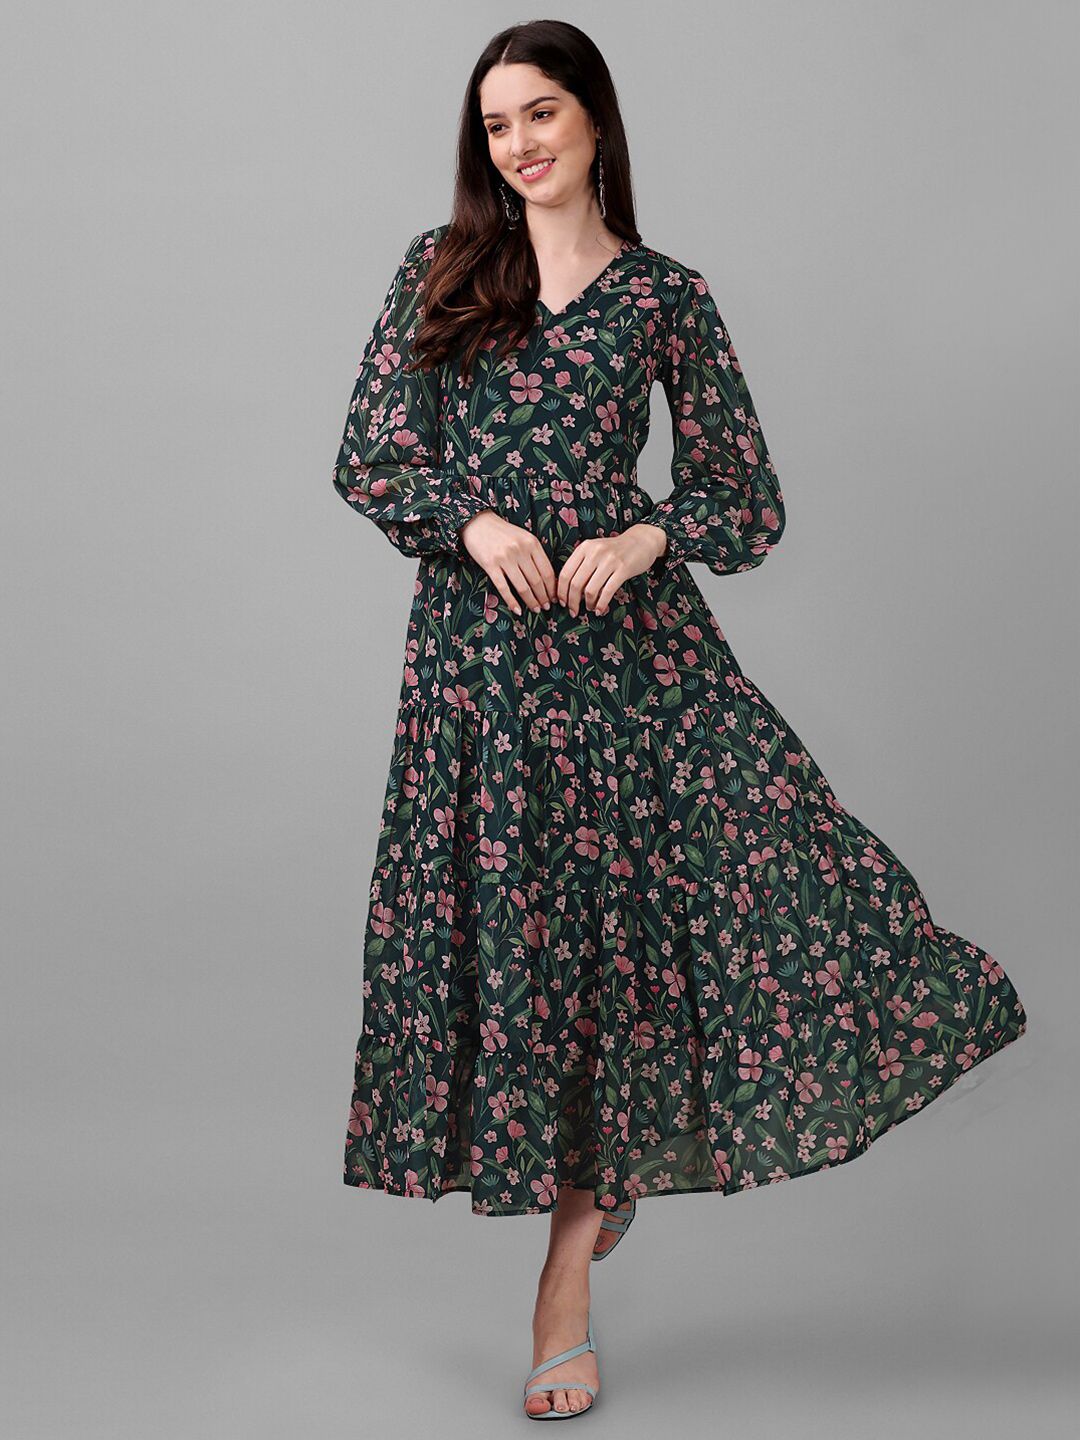 Masakali Co Floral Printed V Neck Fit and Flare Maxi Dress Price in India